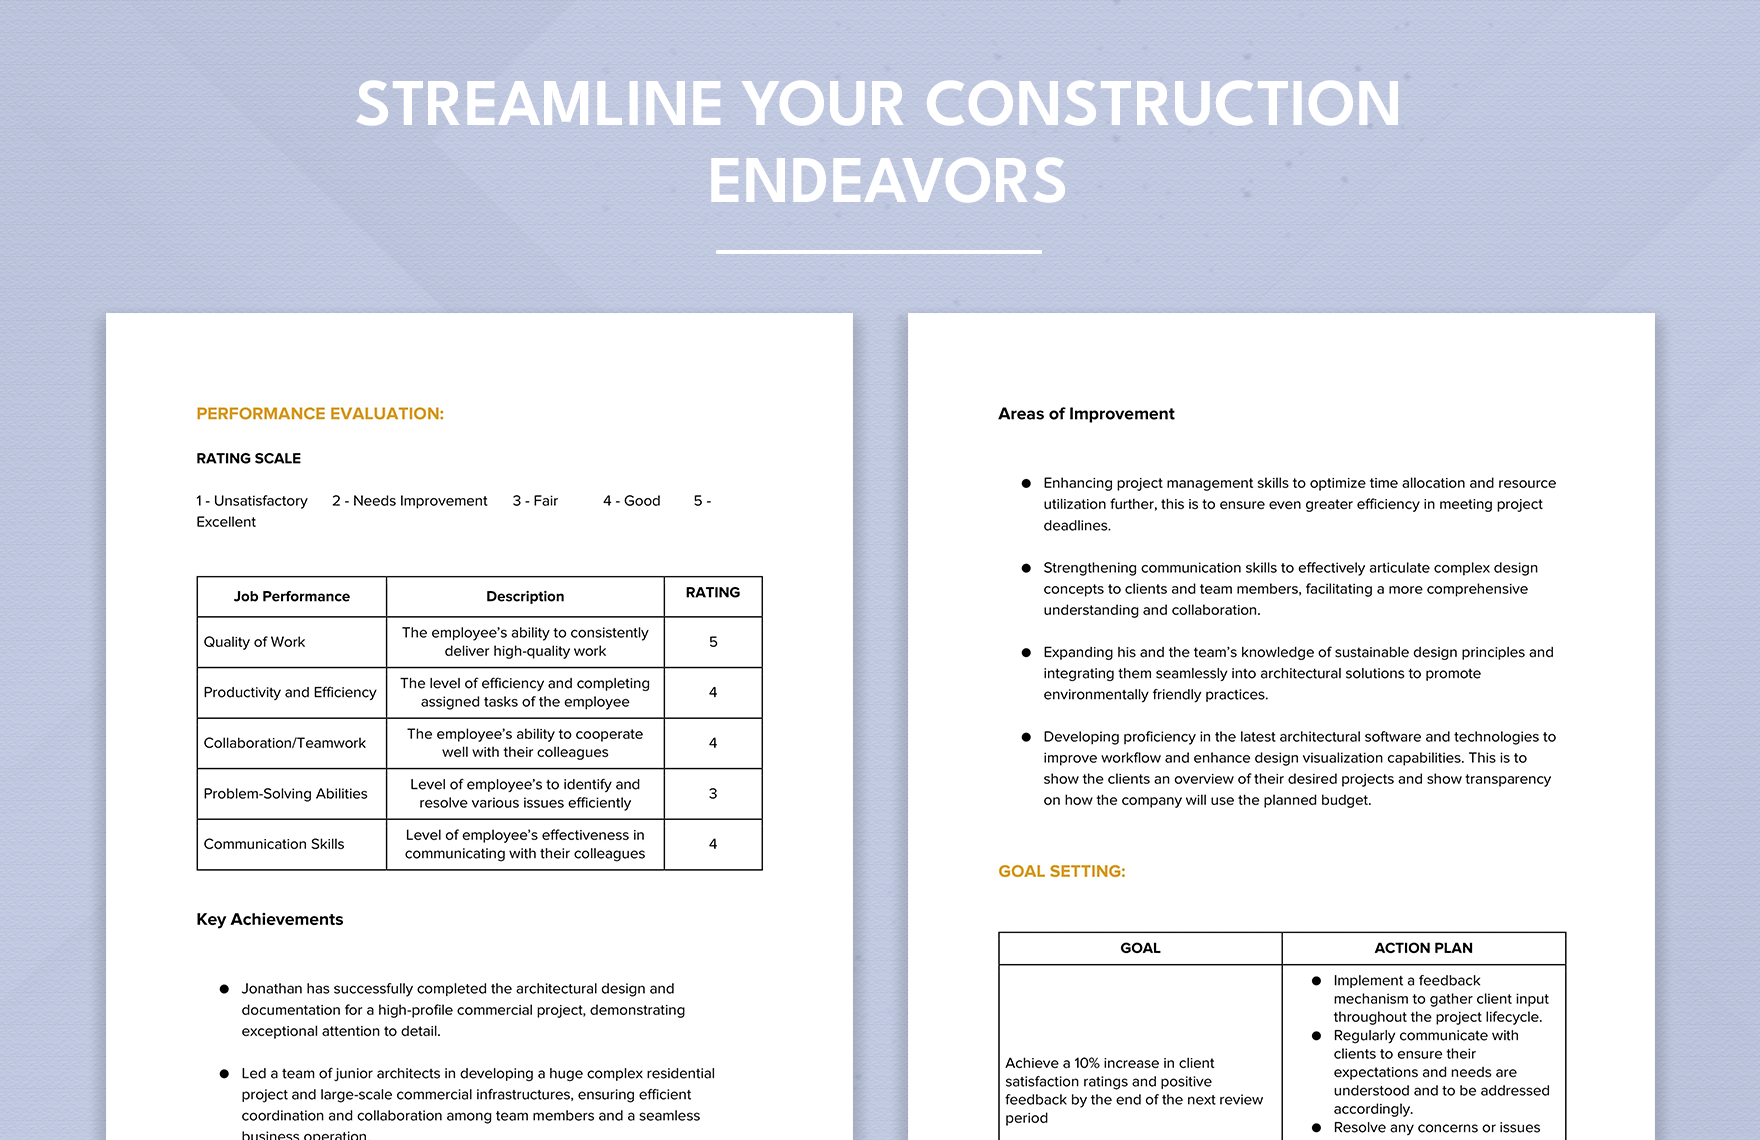 Construction Performance Review and Development Plan